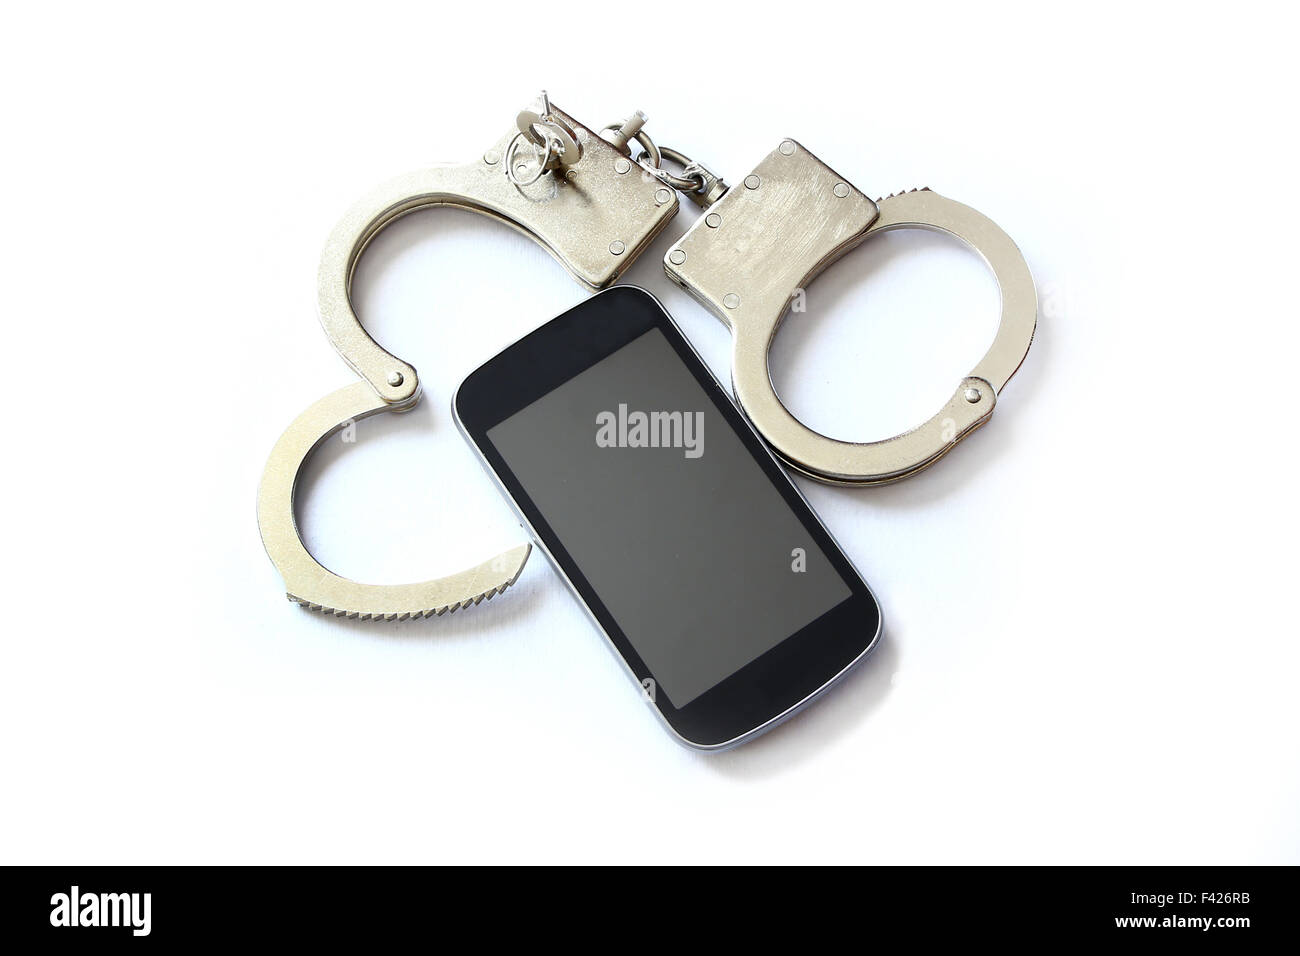 computer hacker smartphone and hand cuffs locked up on white table Stock Photo